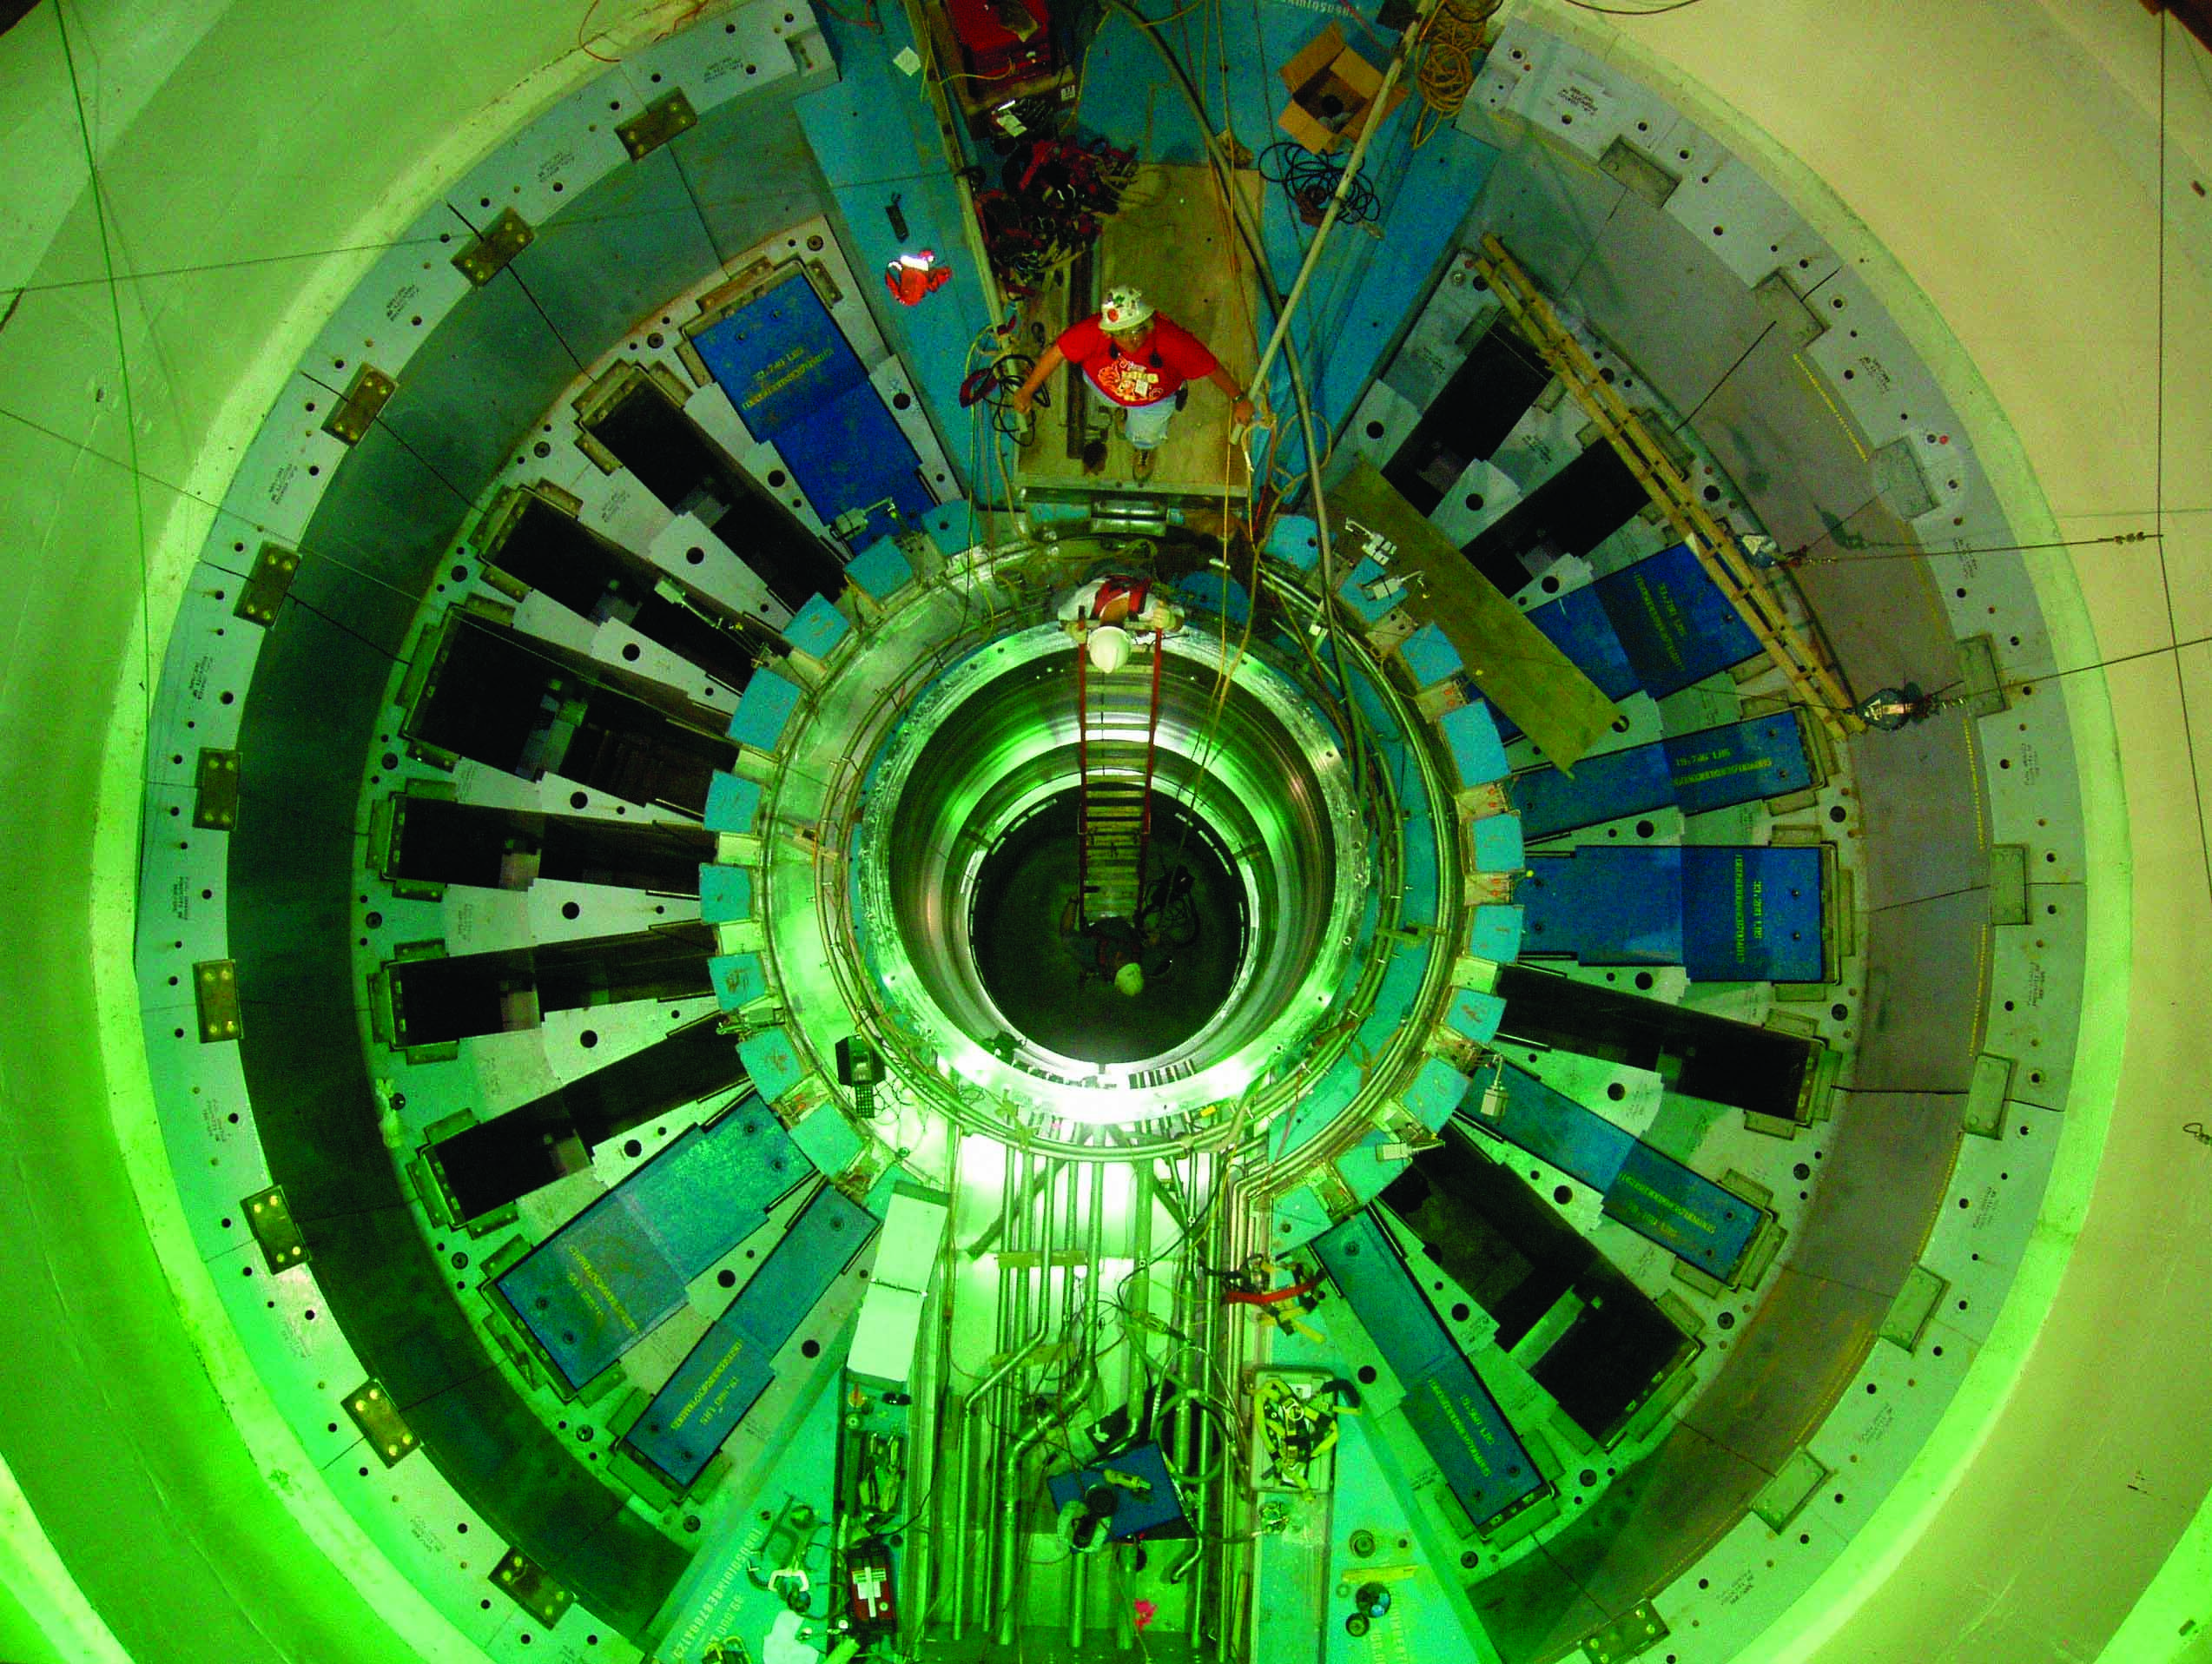 A massive part of Oak Ridge National Laboratory's Spallation Neutron Source during its construction phase in earlier years. The hole in the center is where the target crystal for neutron scattering is placed. Credit: Oak Ridge National Laboratory